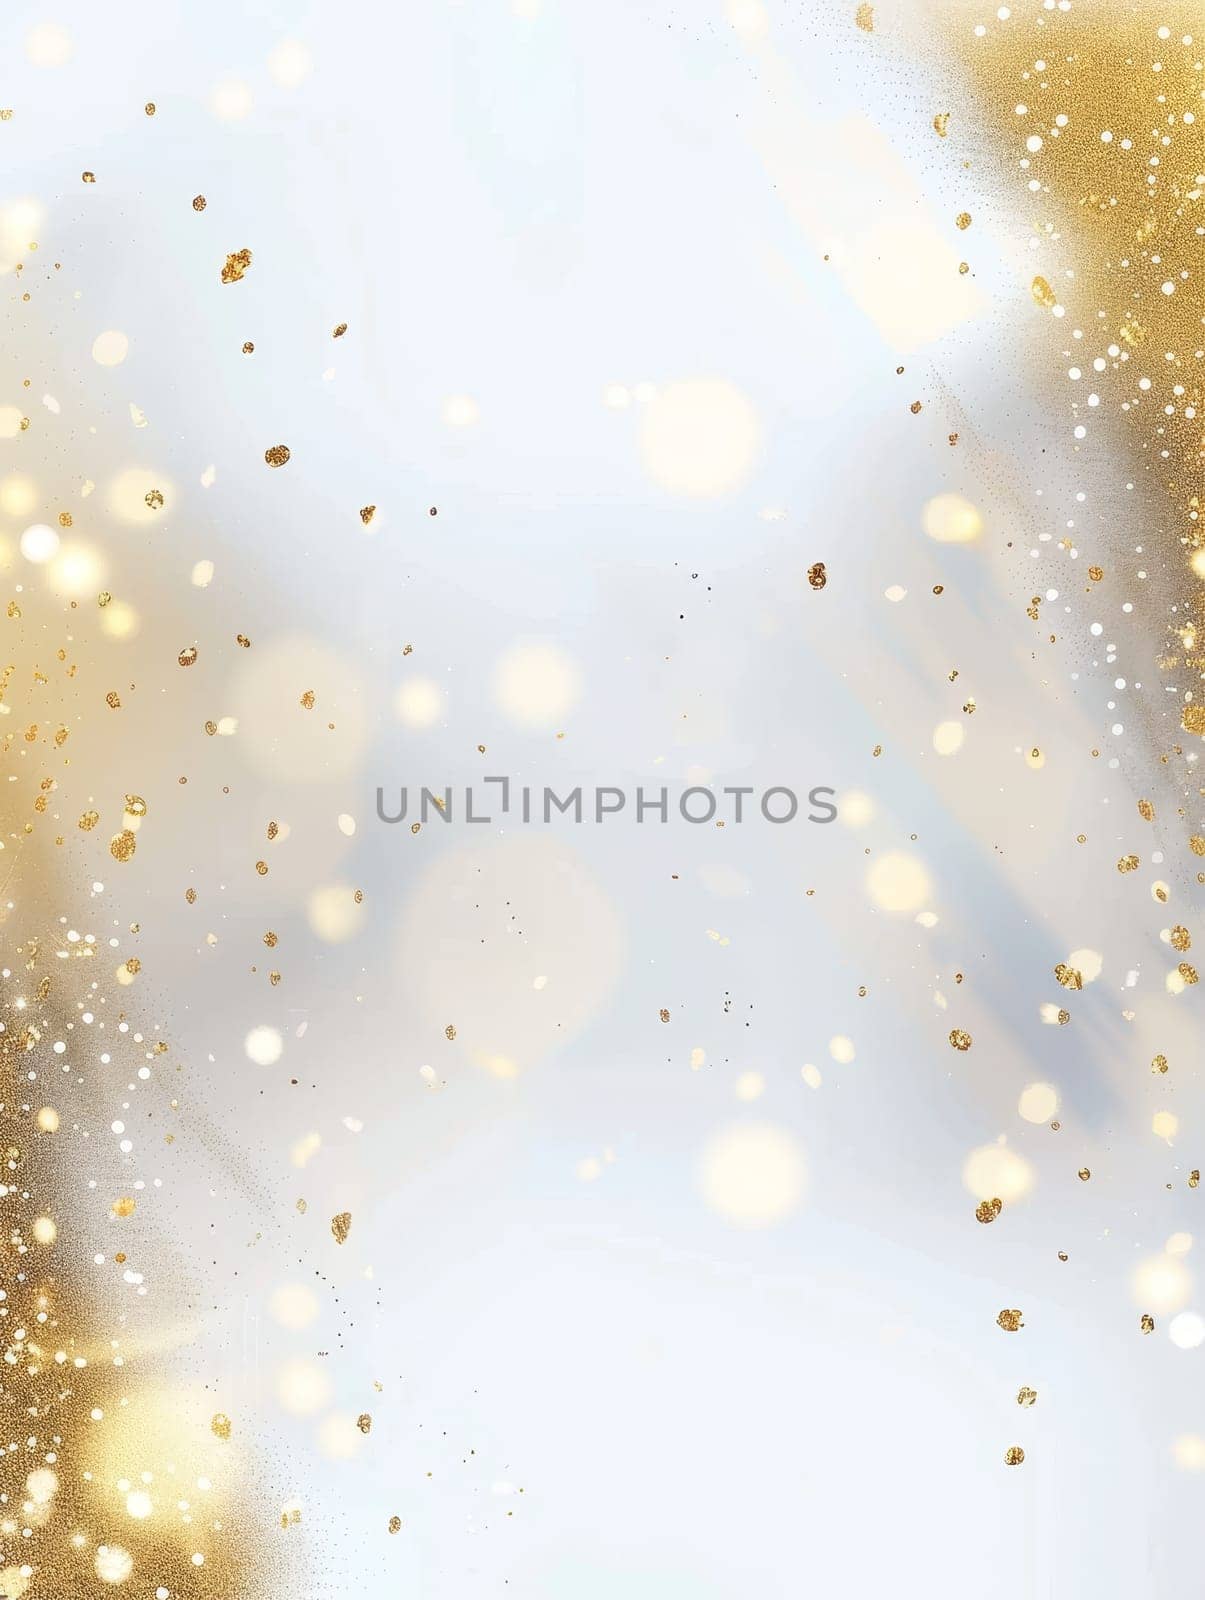 Sparkling gold dust and glitter create a magical winter atmosphere against a soft, snowy backdrop. The festive ambience evokes the spirit of holiday celebrations